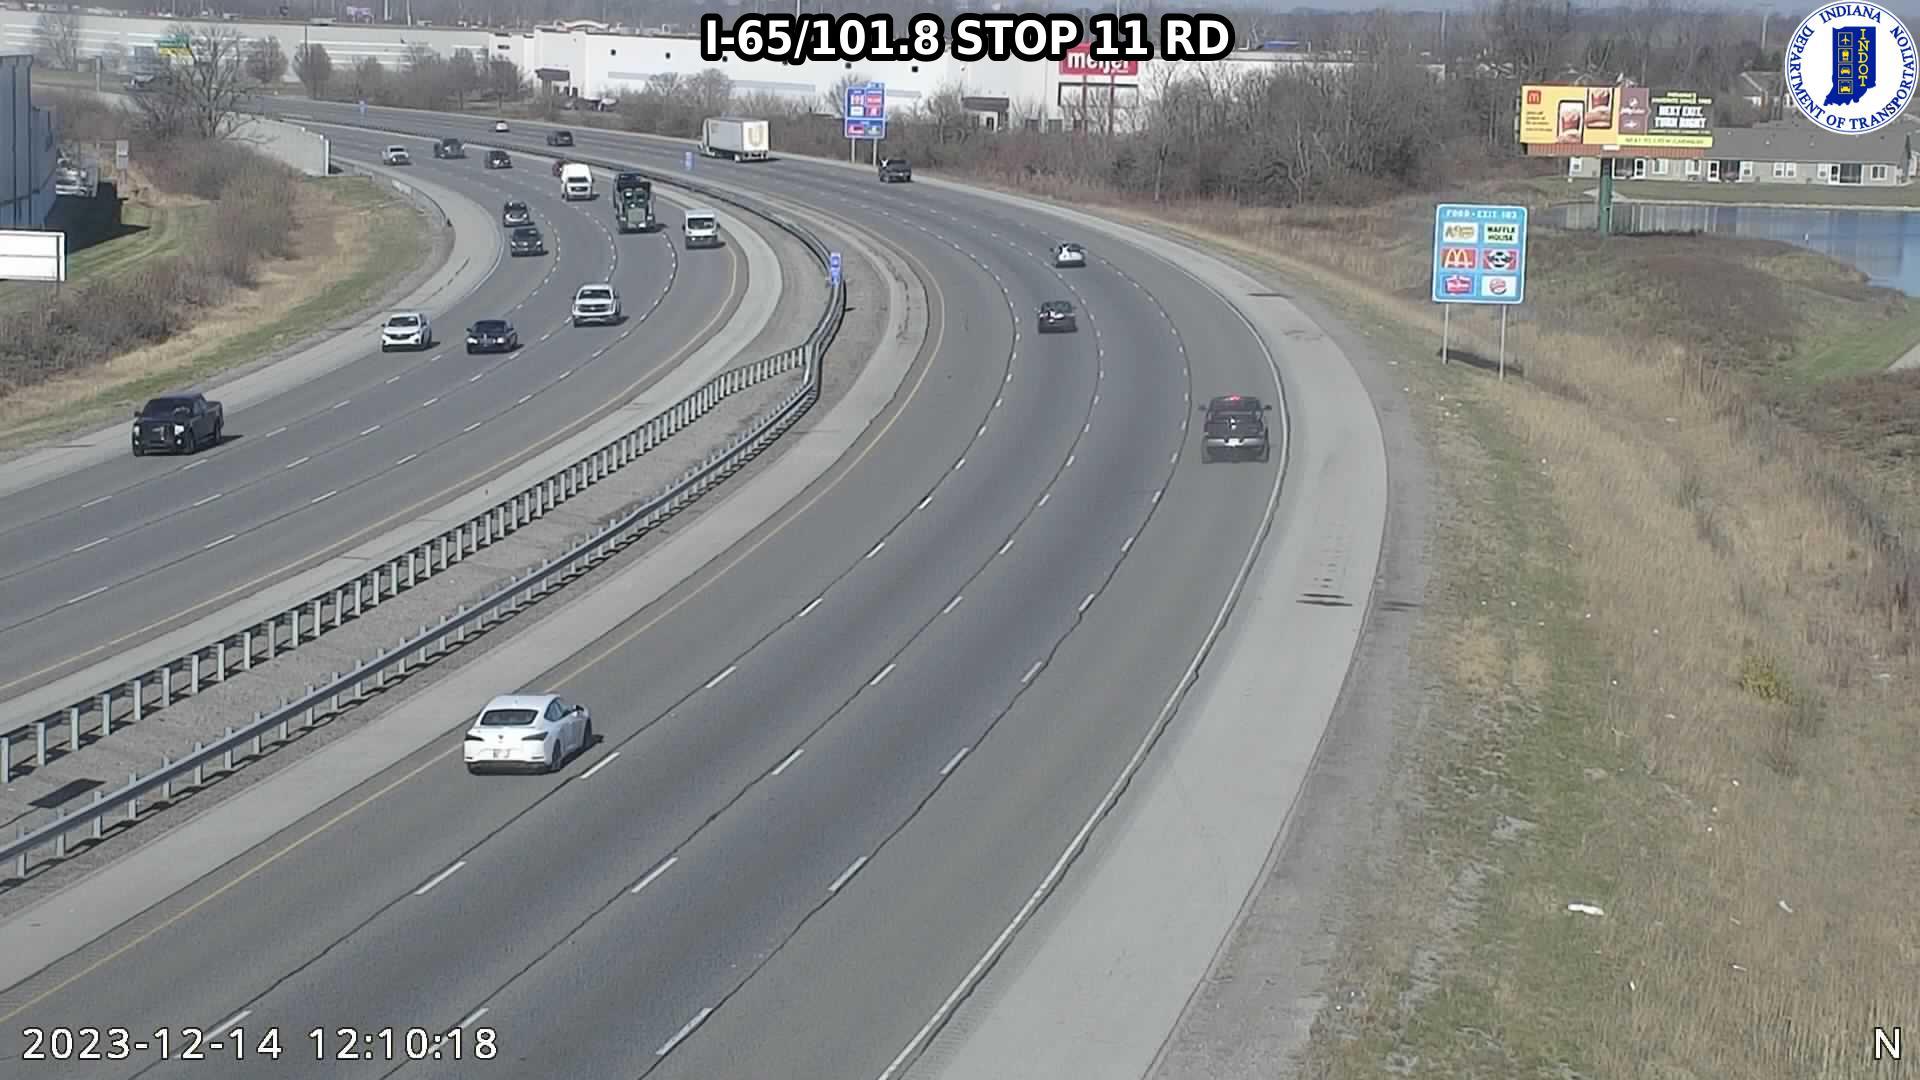 Traffic Cam Indianapolis: I-65: I-65/101.8 STOP 11 RD Player